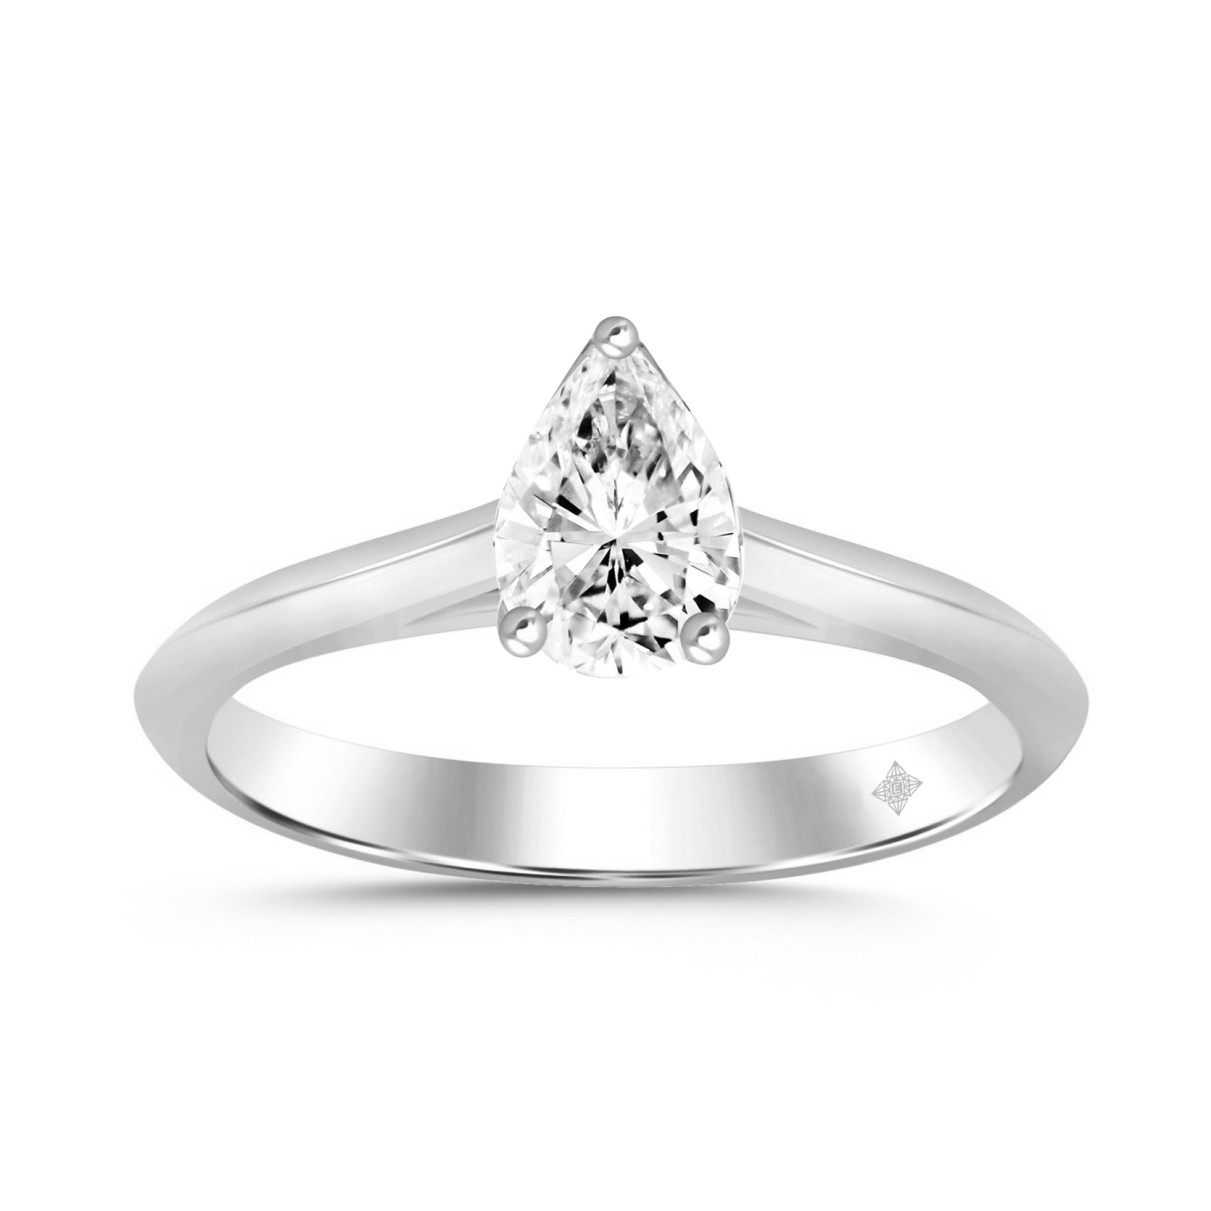 LADIES SOLITAIRE RING 2 1/2CT PEAR DIAMOND 14K WHI...